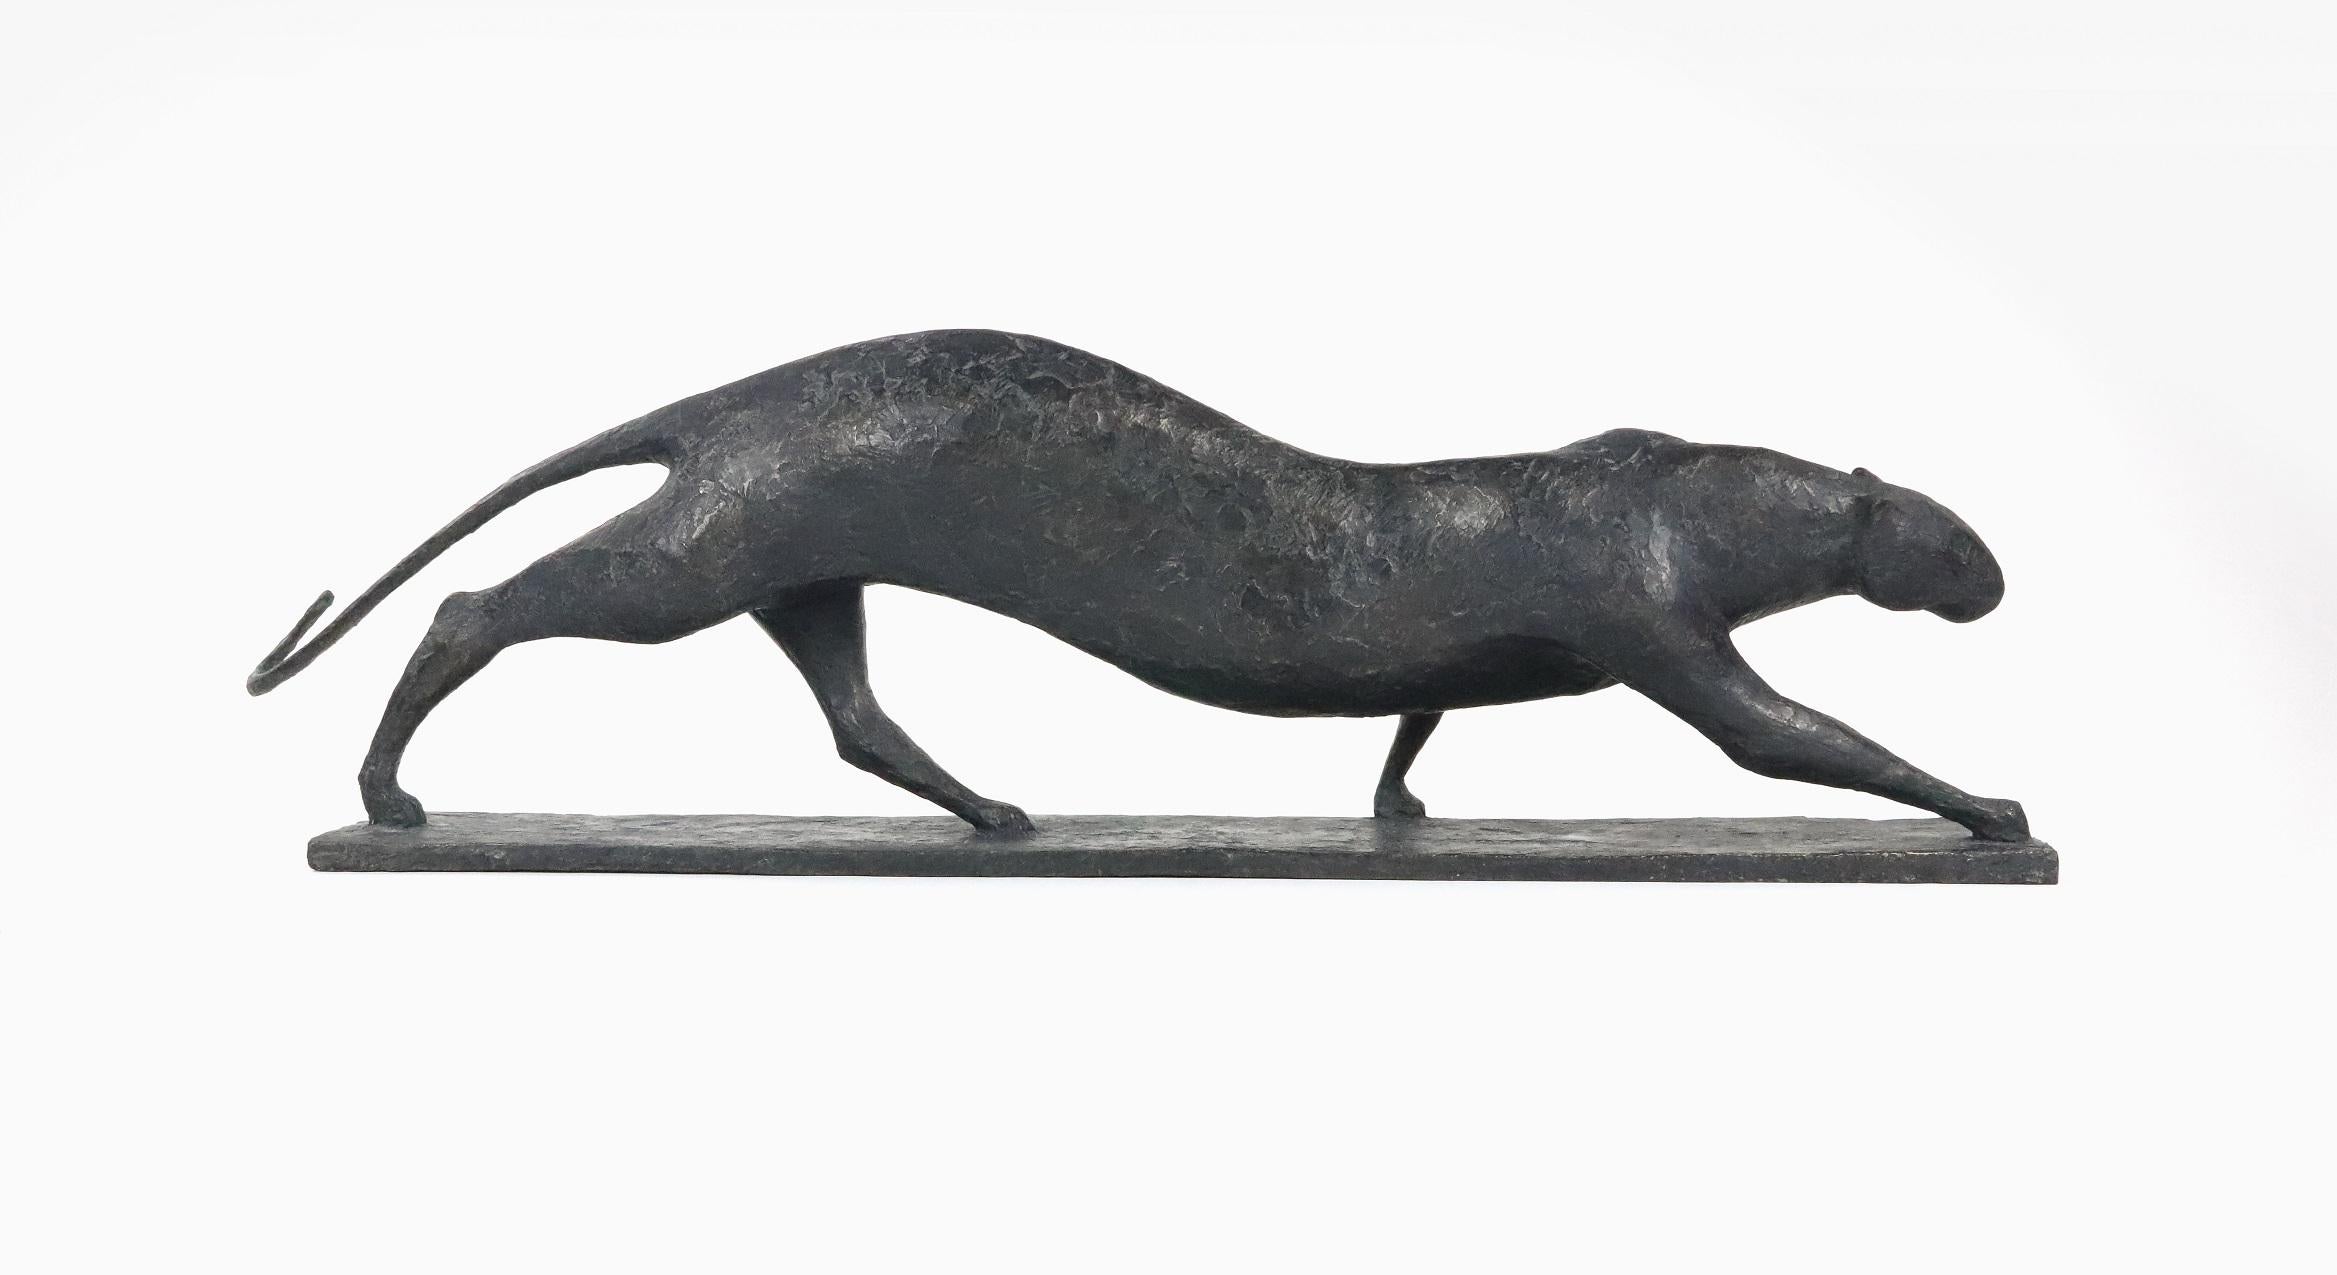 Feline IV is a bronze sculpture by French contemporary artist Pierre Yermia, dimensions are 24 × 90 × 20 cm (9.4 × 35.4 × 7.9 in). 
The sculpture is signed and numbered, it is part of a limited edition of 8 editions + 4 artist’s proofs, and comes